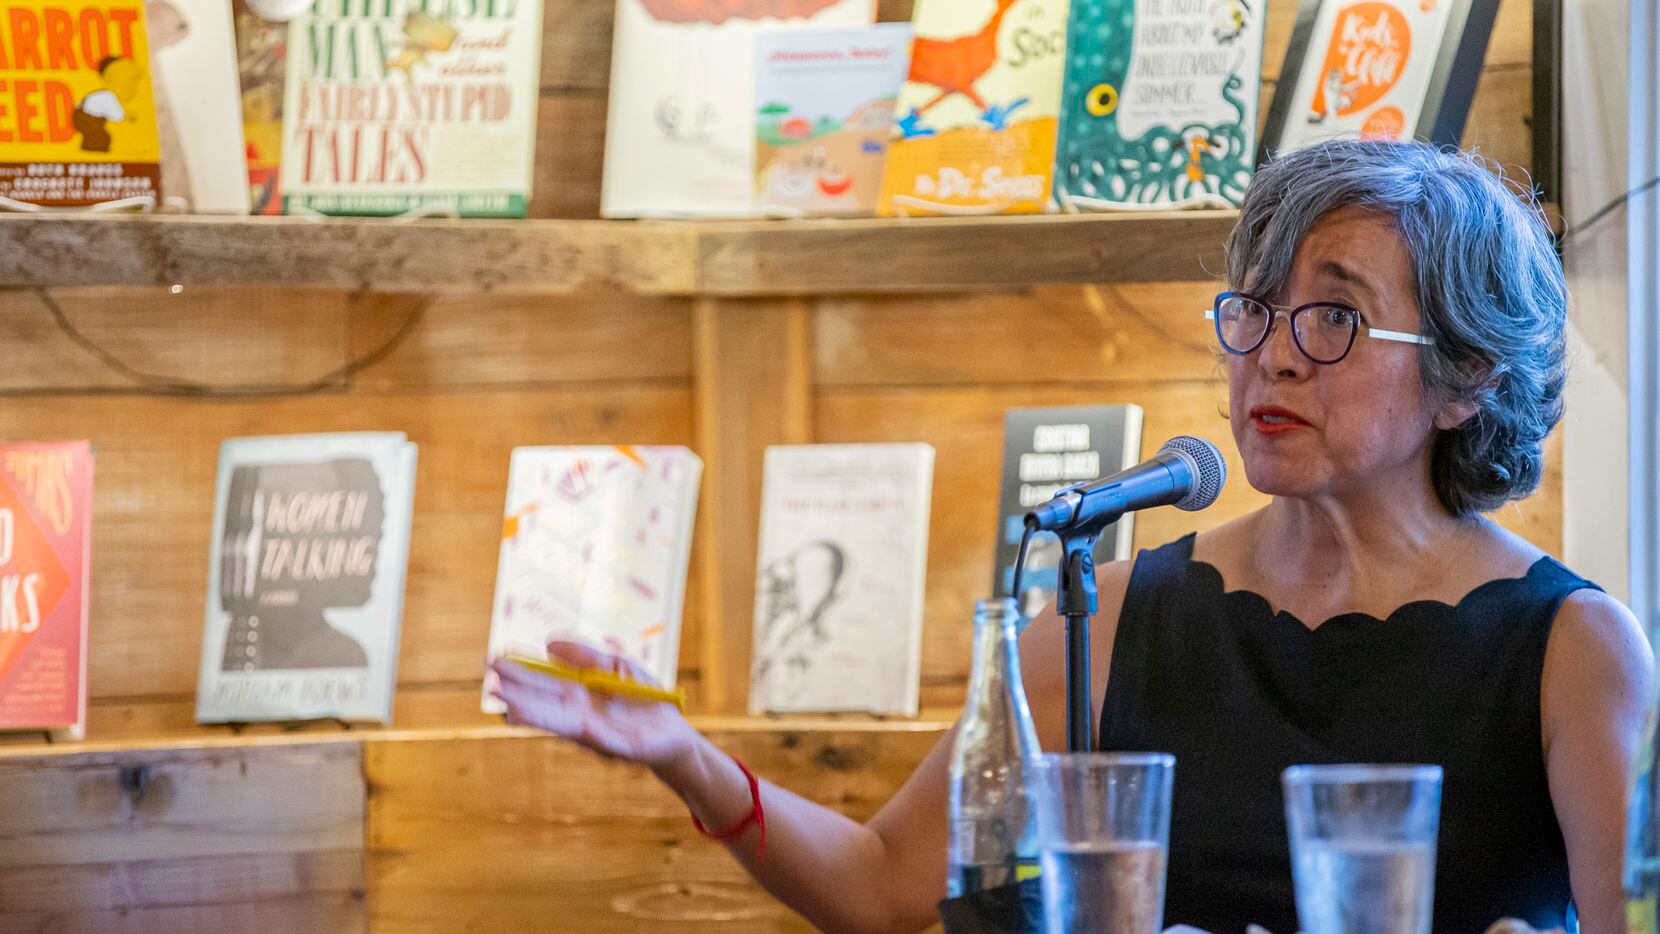 Author Cristina Rivera Garza spoke during a panel discussion at The Wild Detectives...